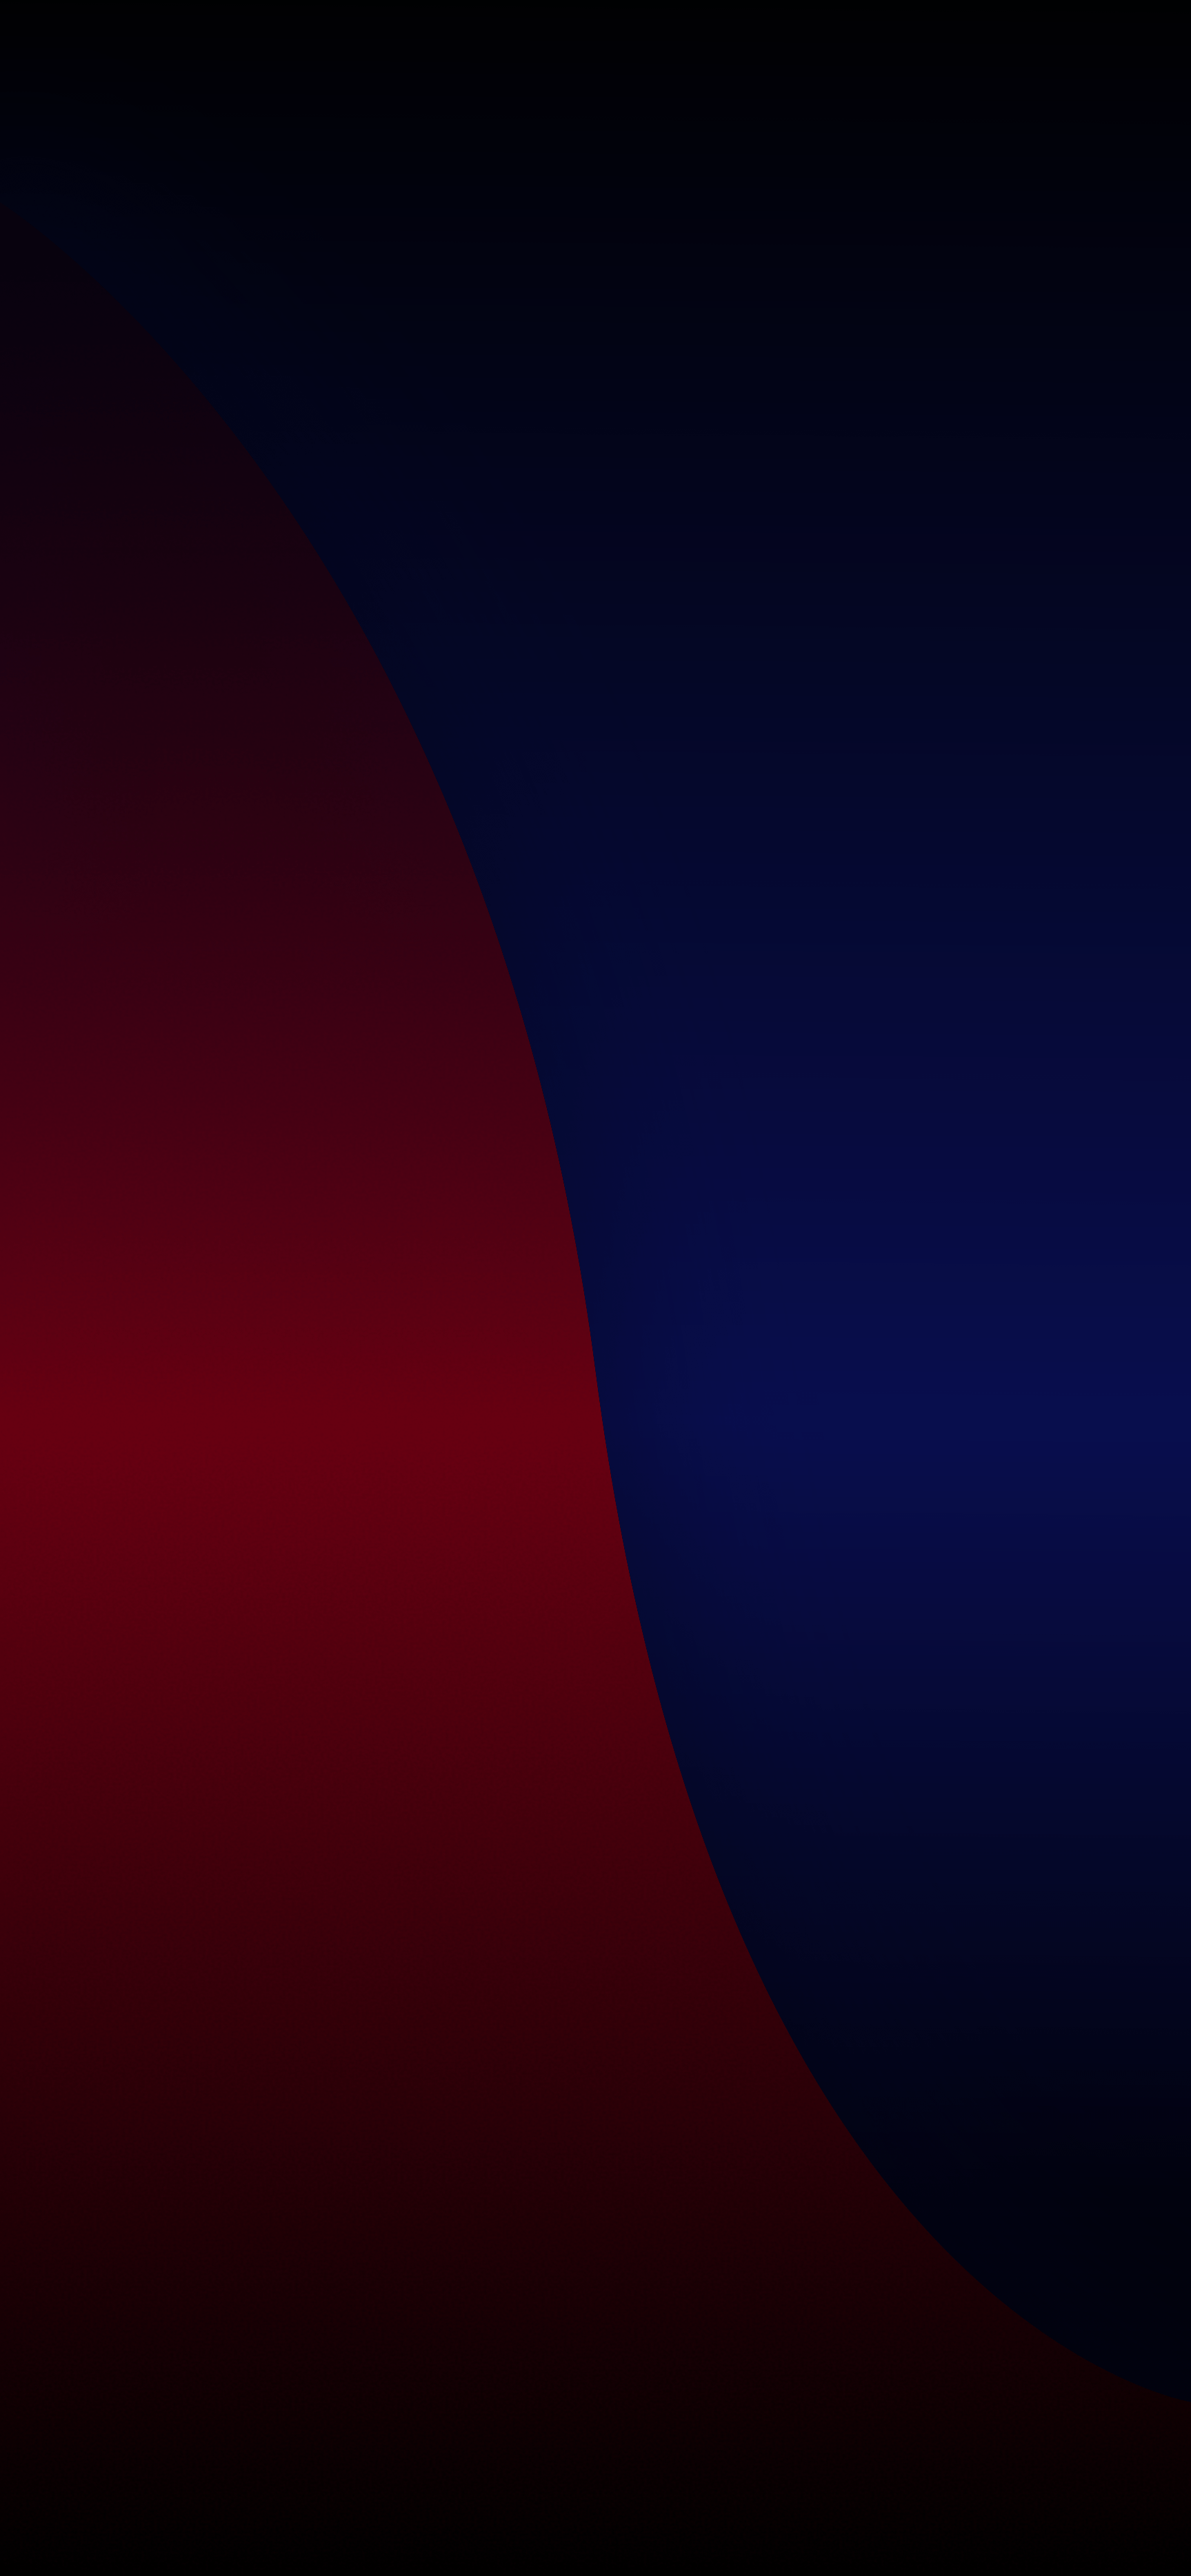 Any Takers Red Blue iPhone Wallpaper Full Res Link